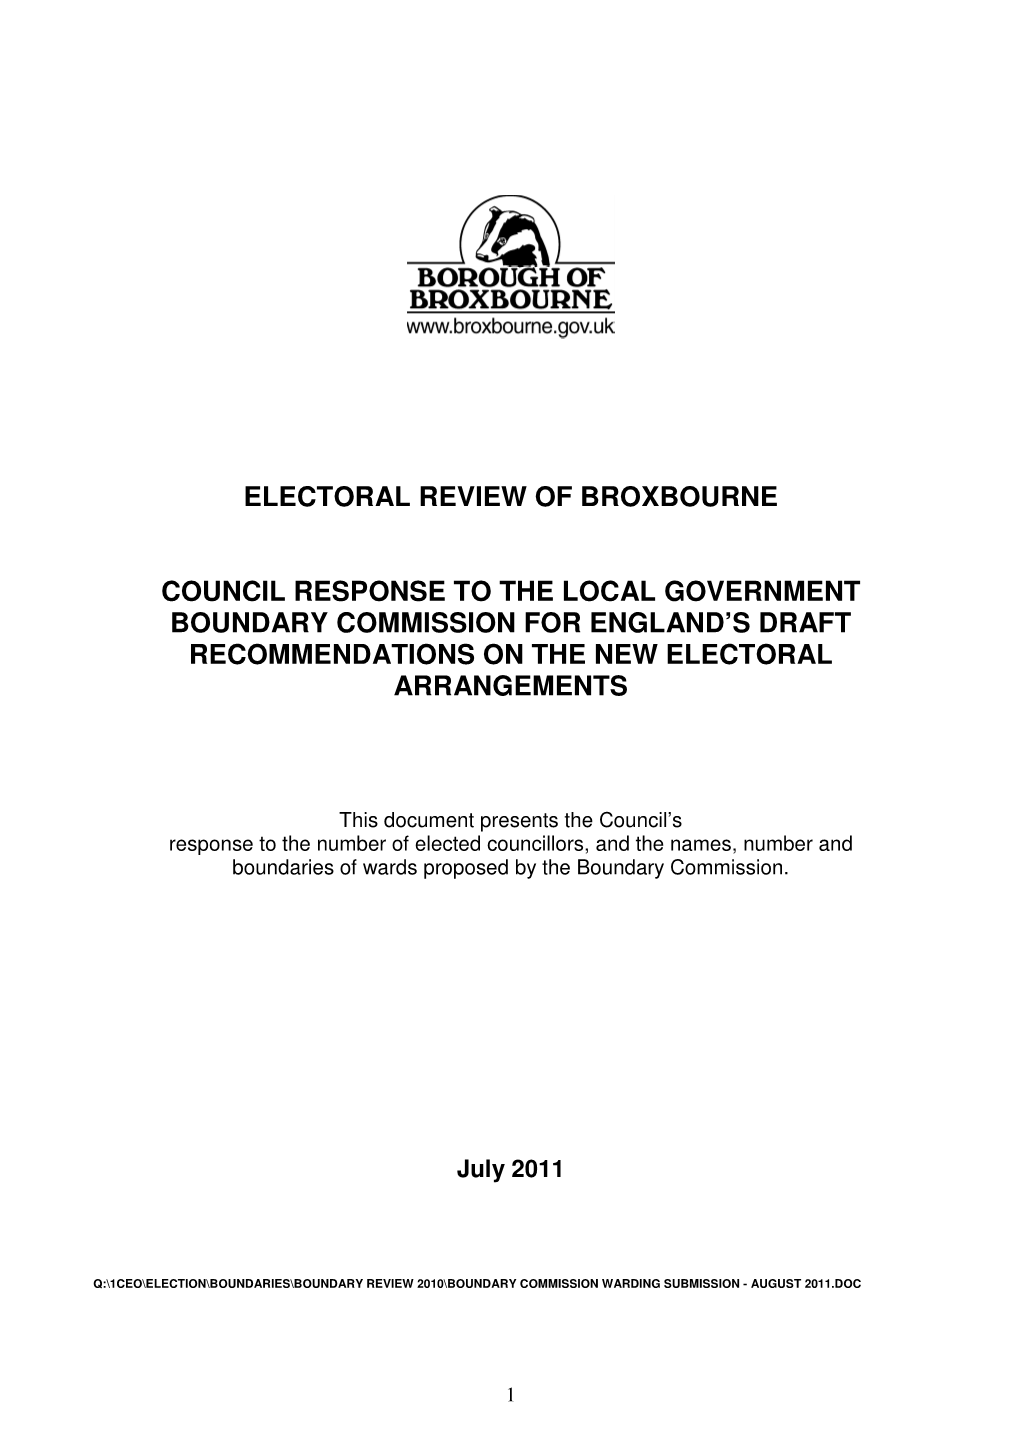 Electoral Review of Broxbourne Council